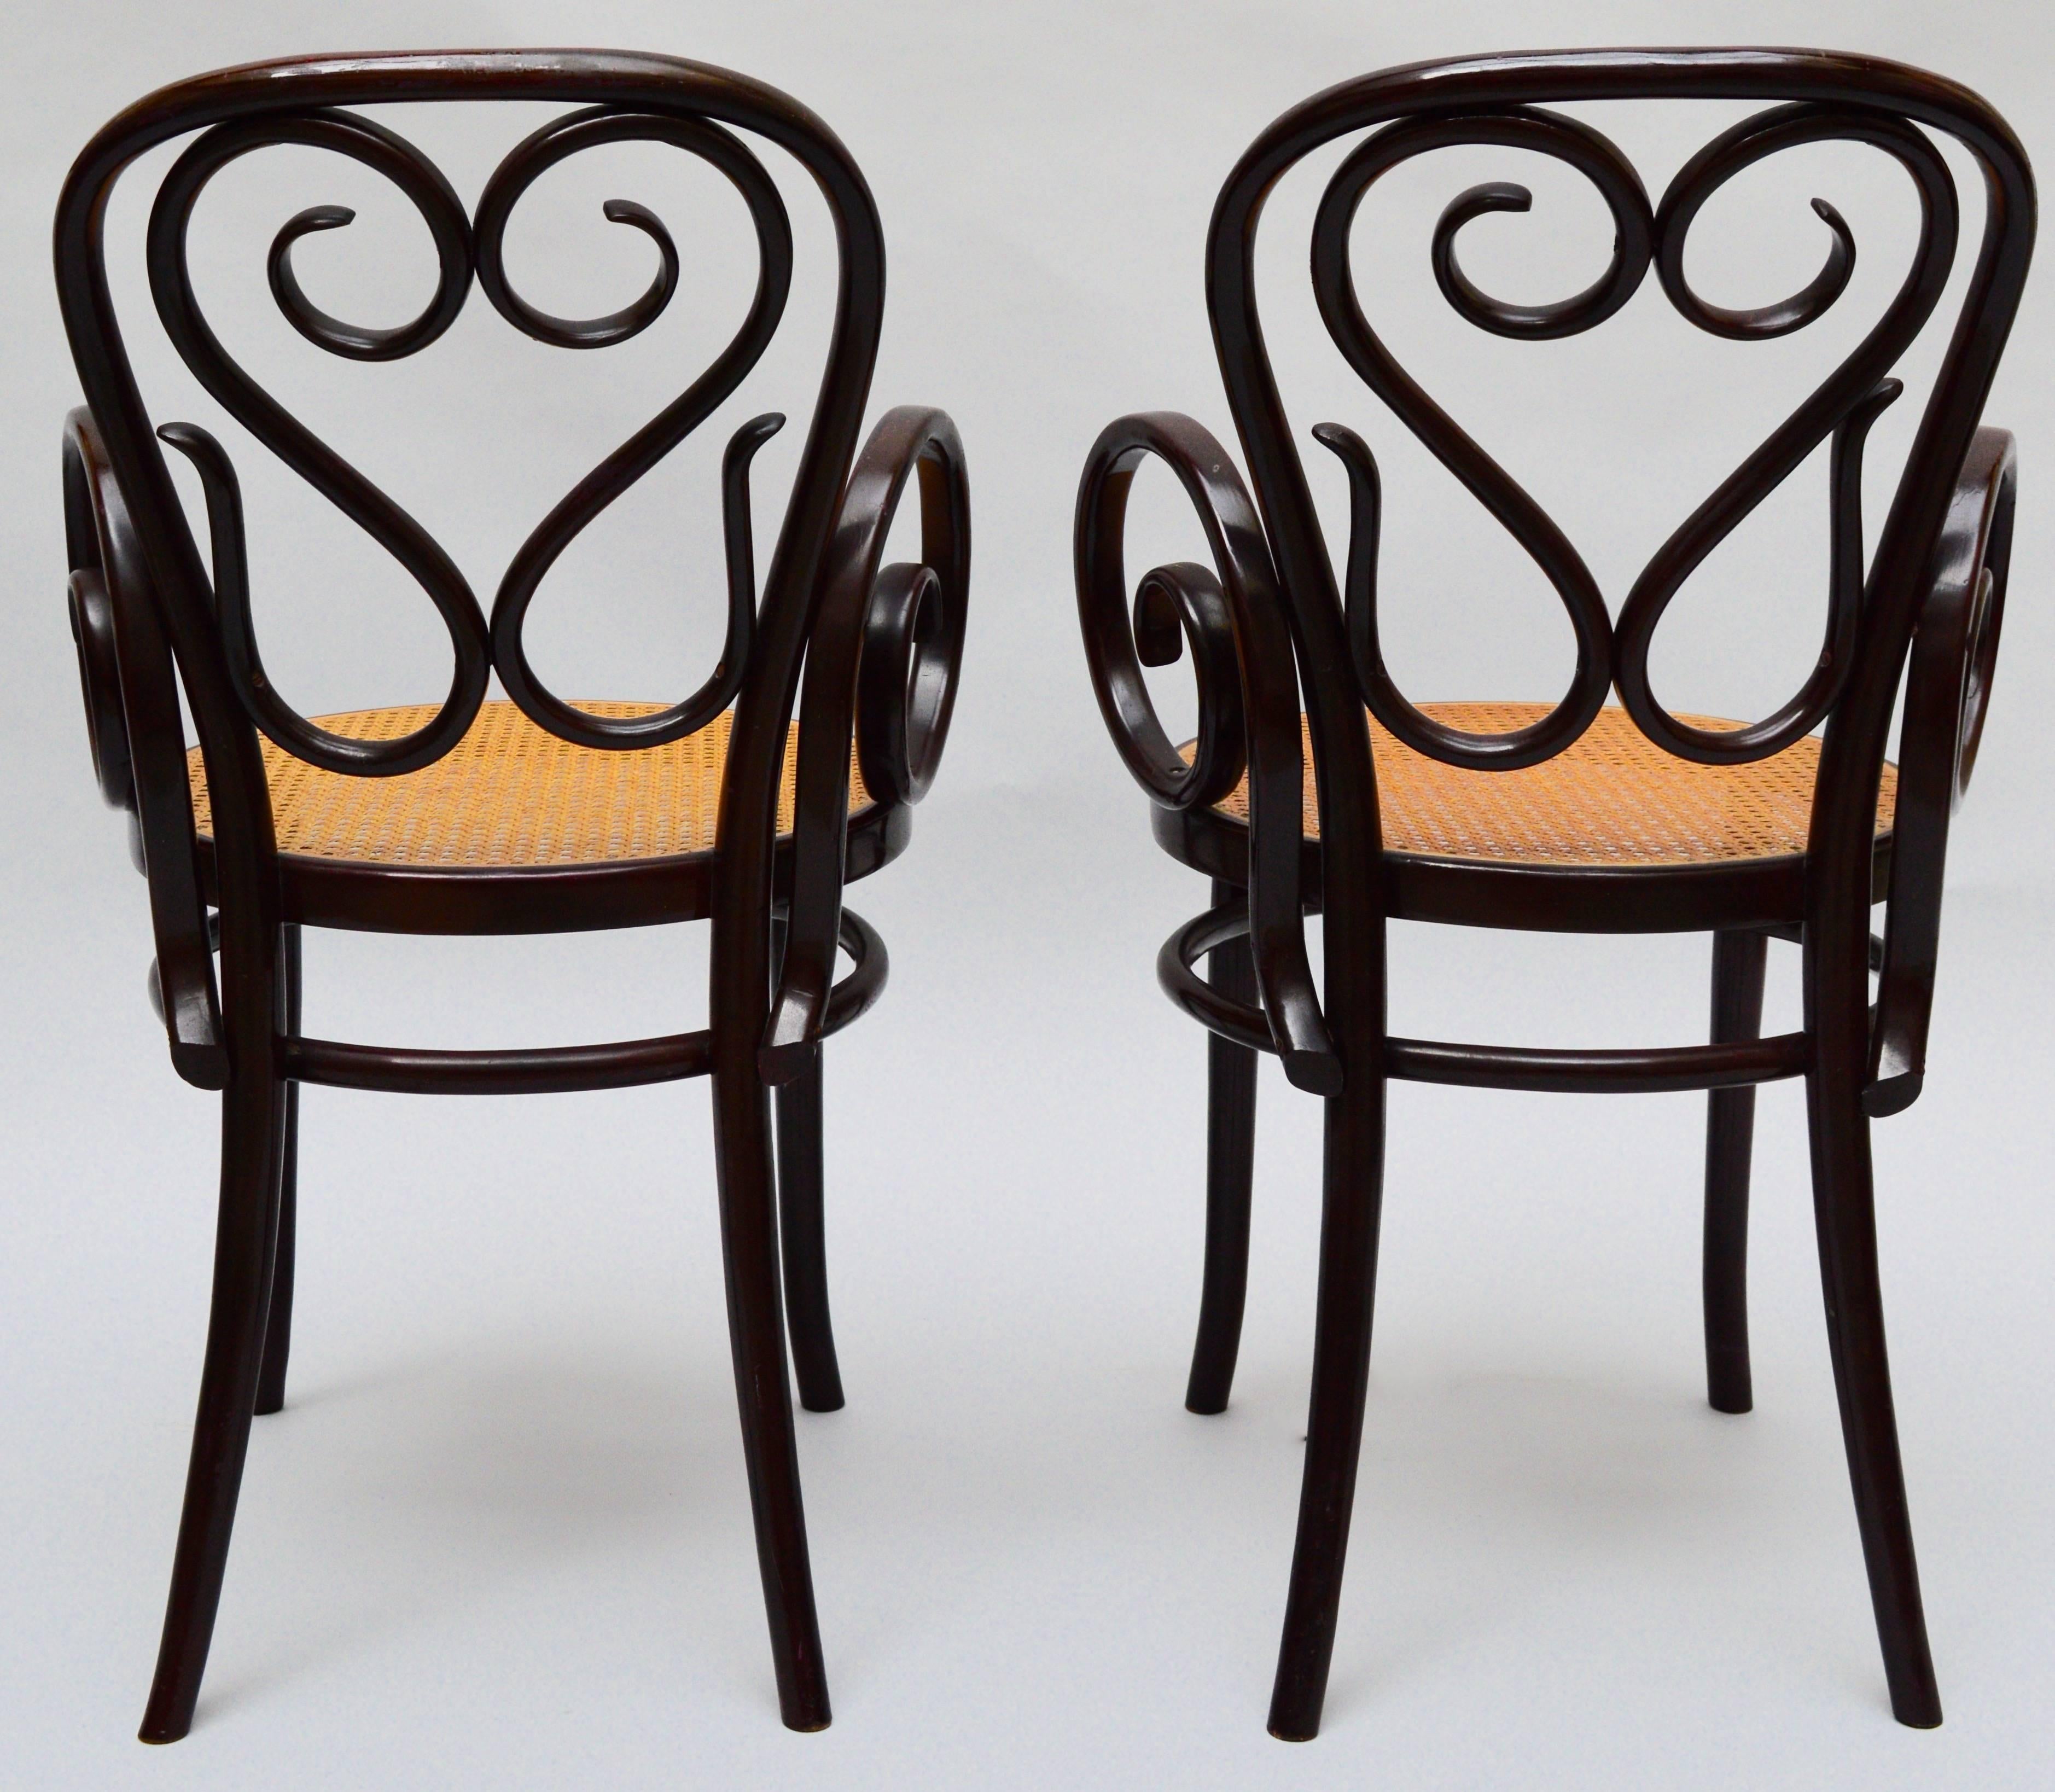 A pair of bentwood armchairs with caned seats, excellent condition.
The chairs are unmarked other than the worn 